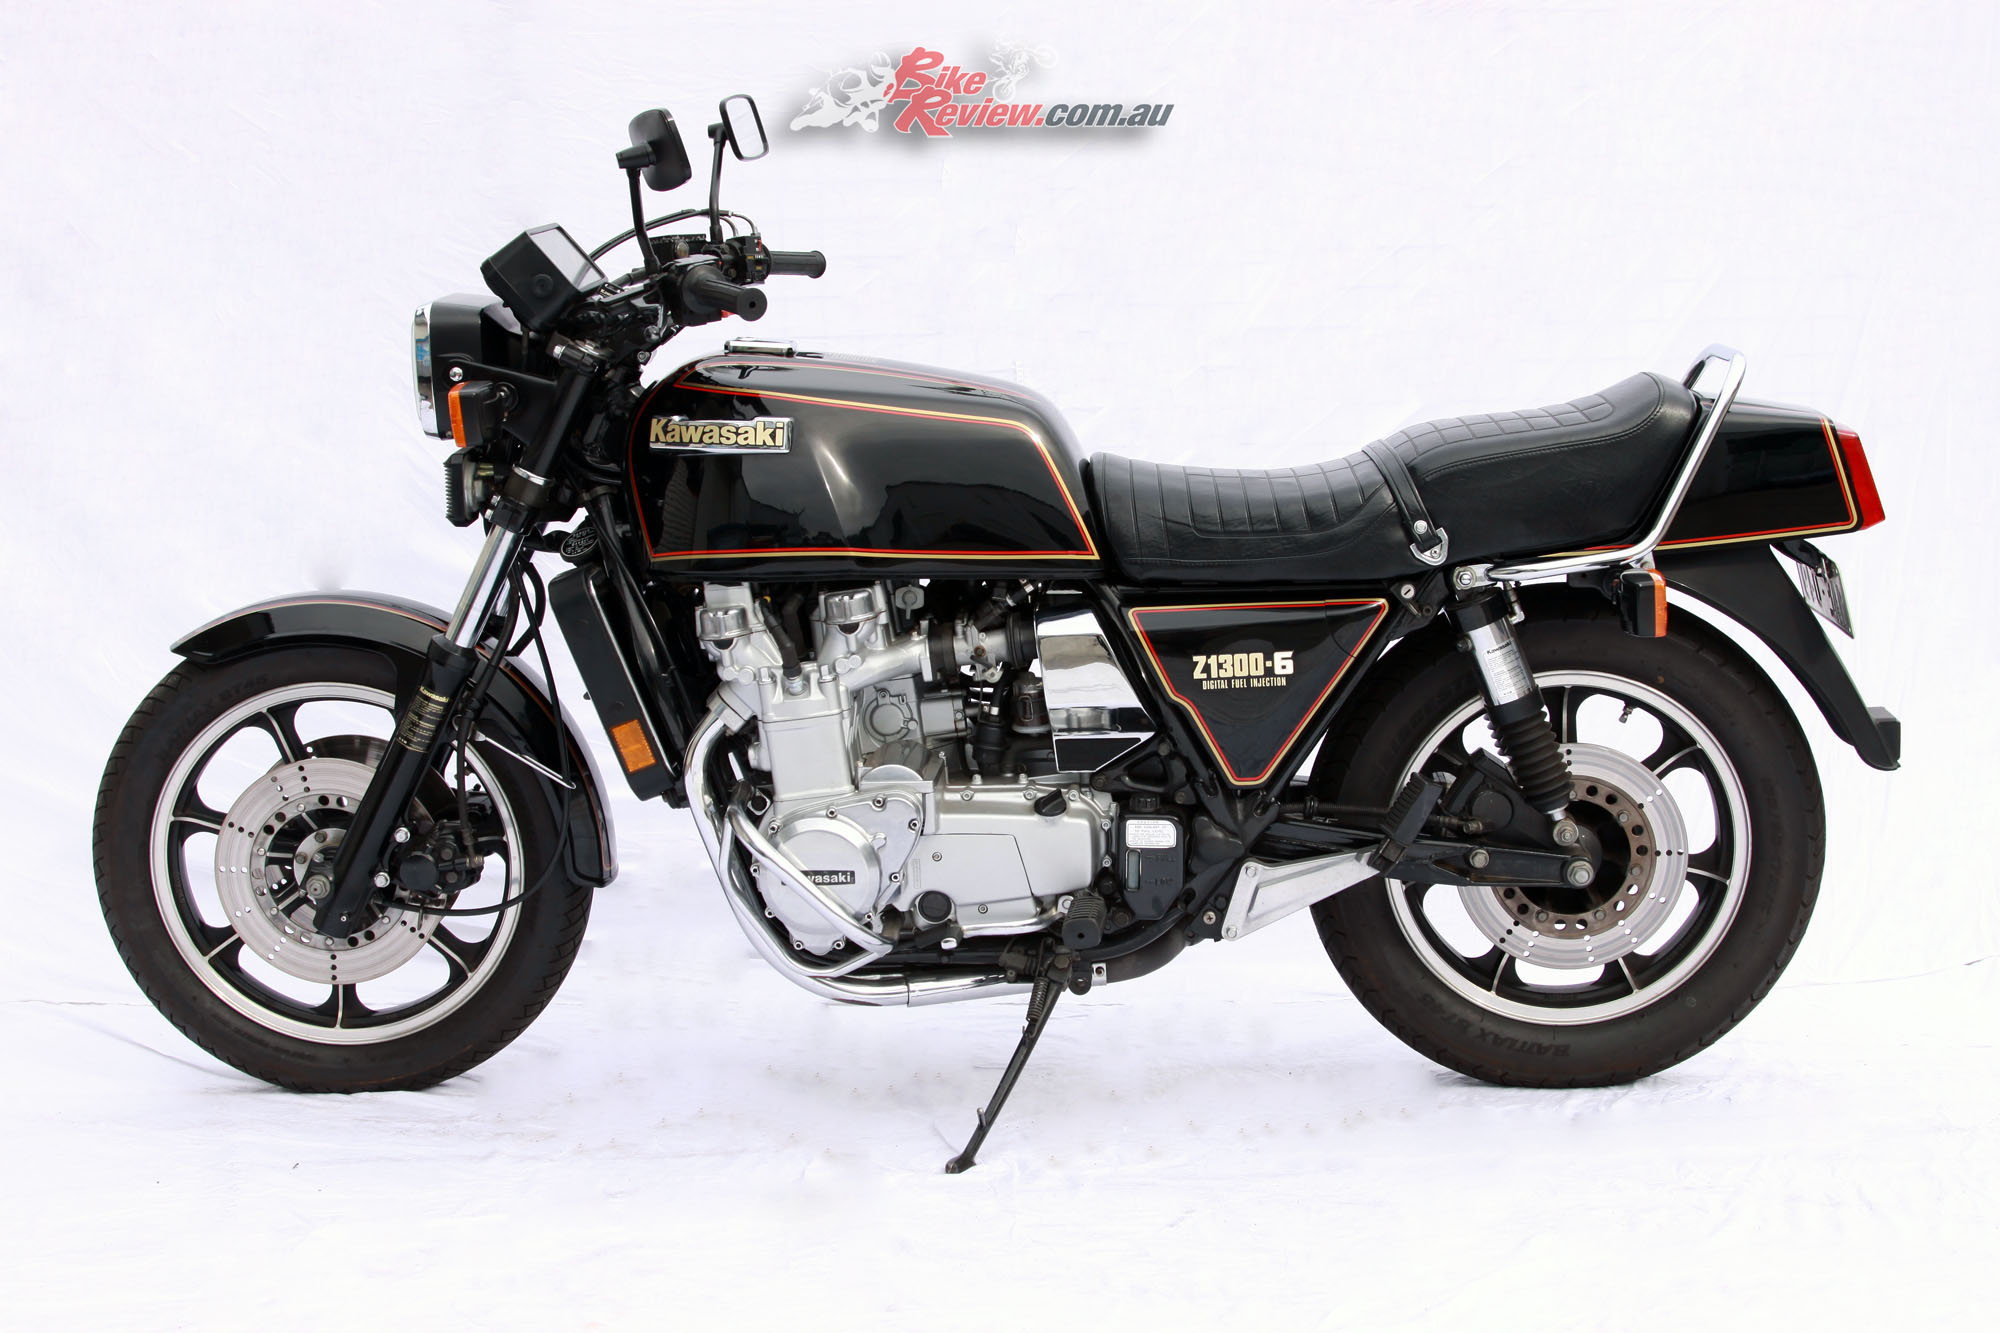 Classic Collectable: Kawasaki Z1300 Six - Review